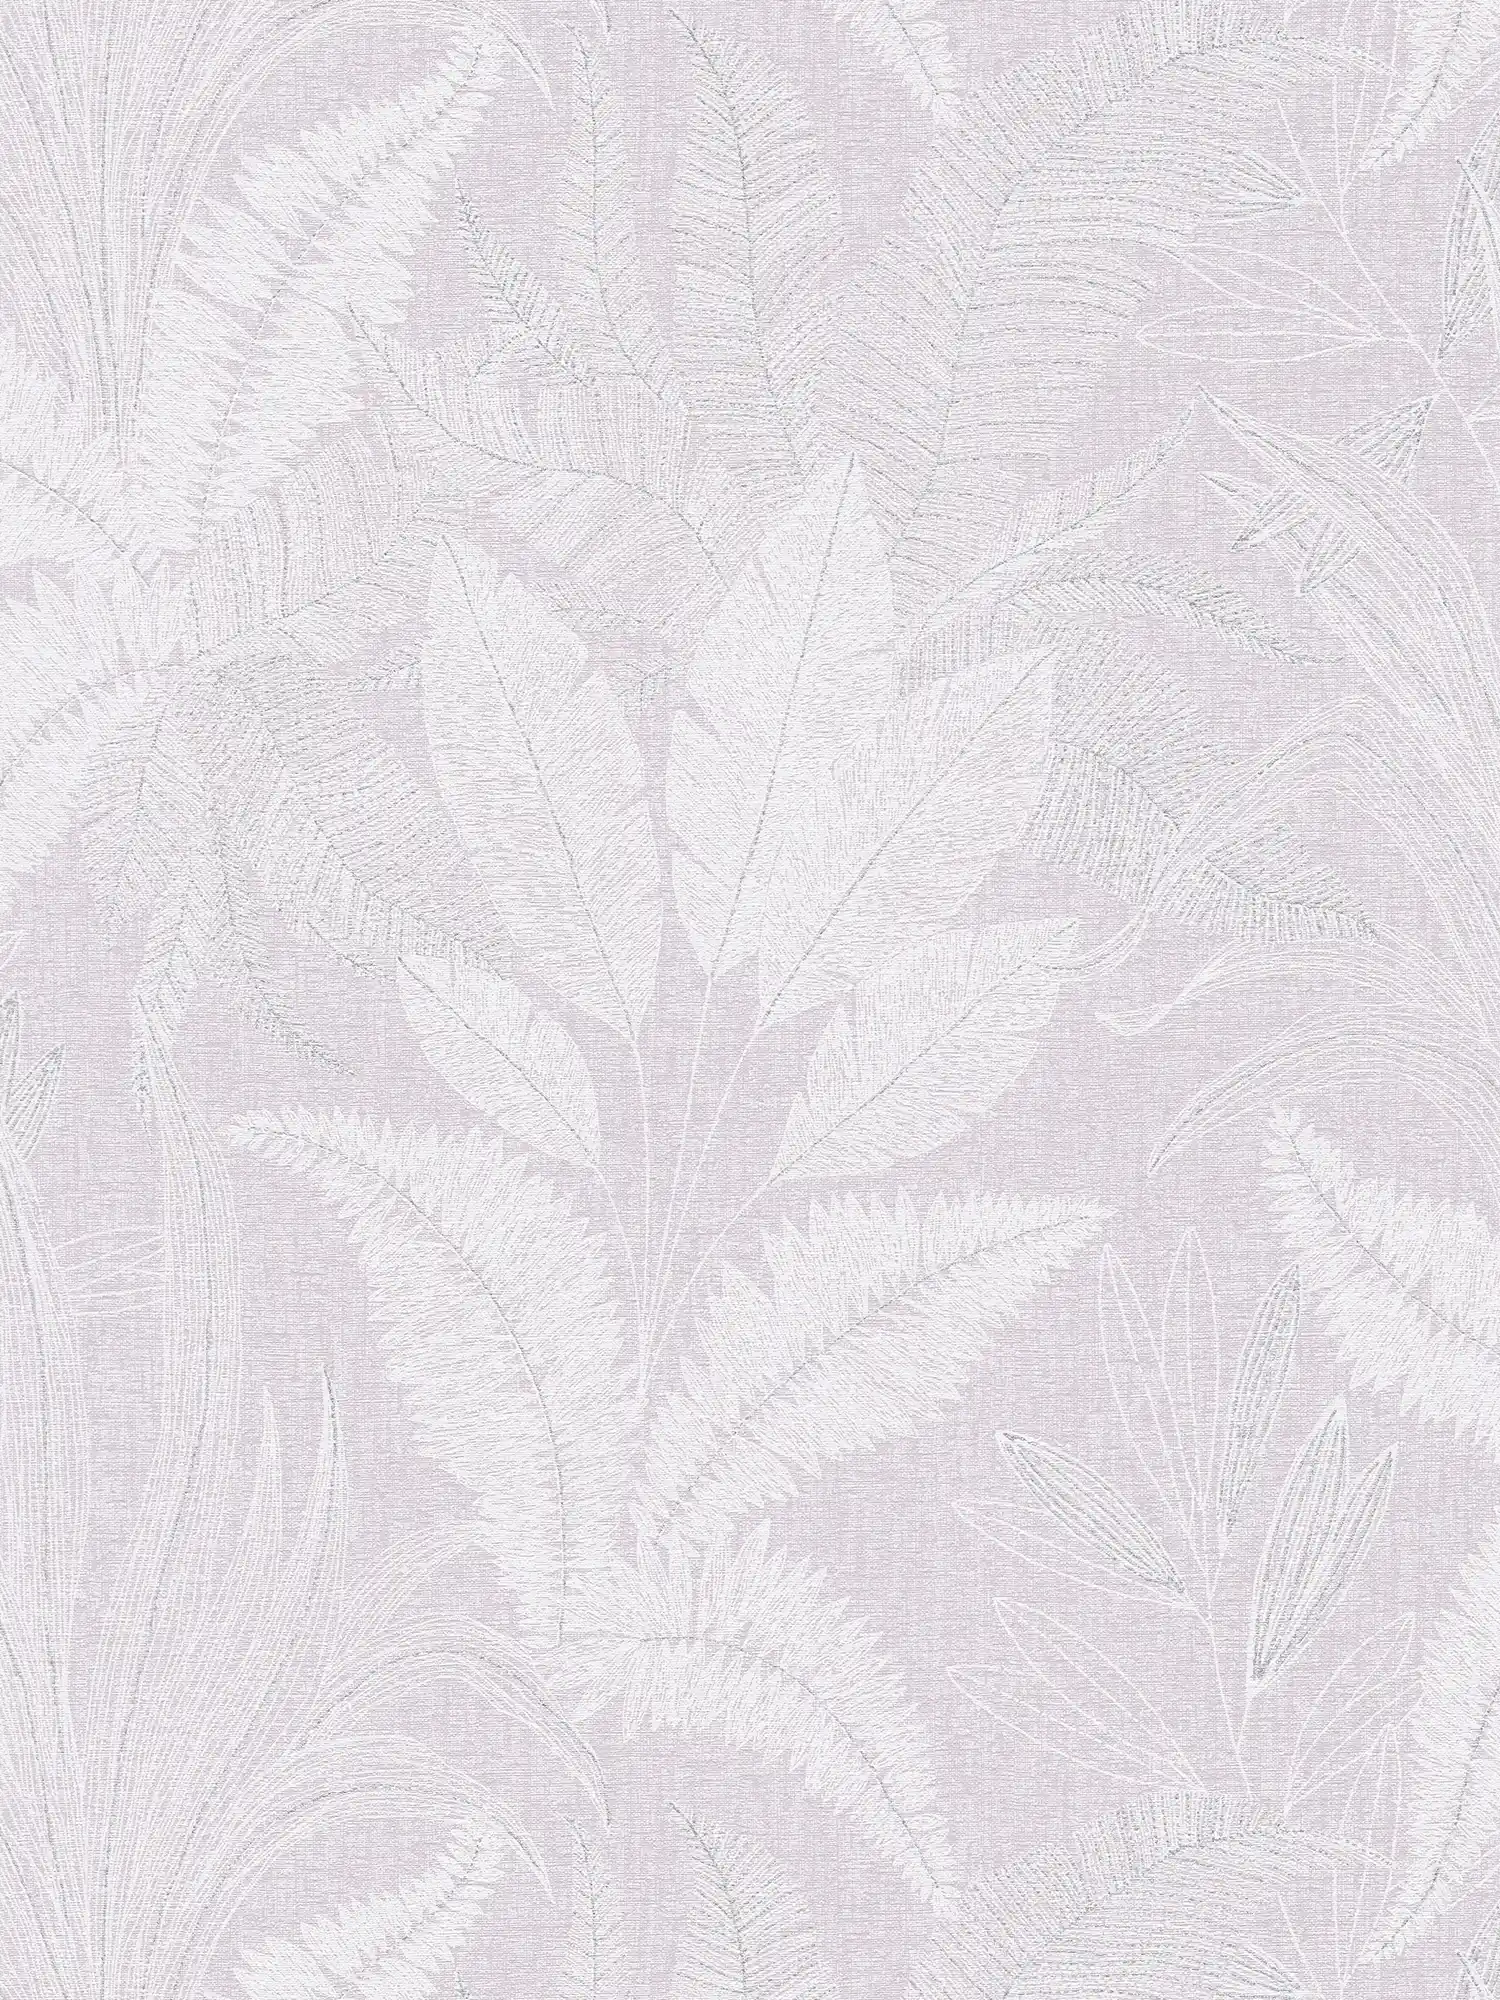 Non-woven wallpaper with large leaf pattern lightly textured - violet, white, grey
